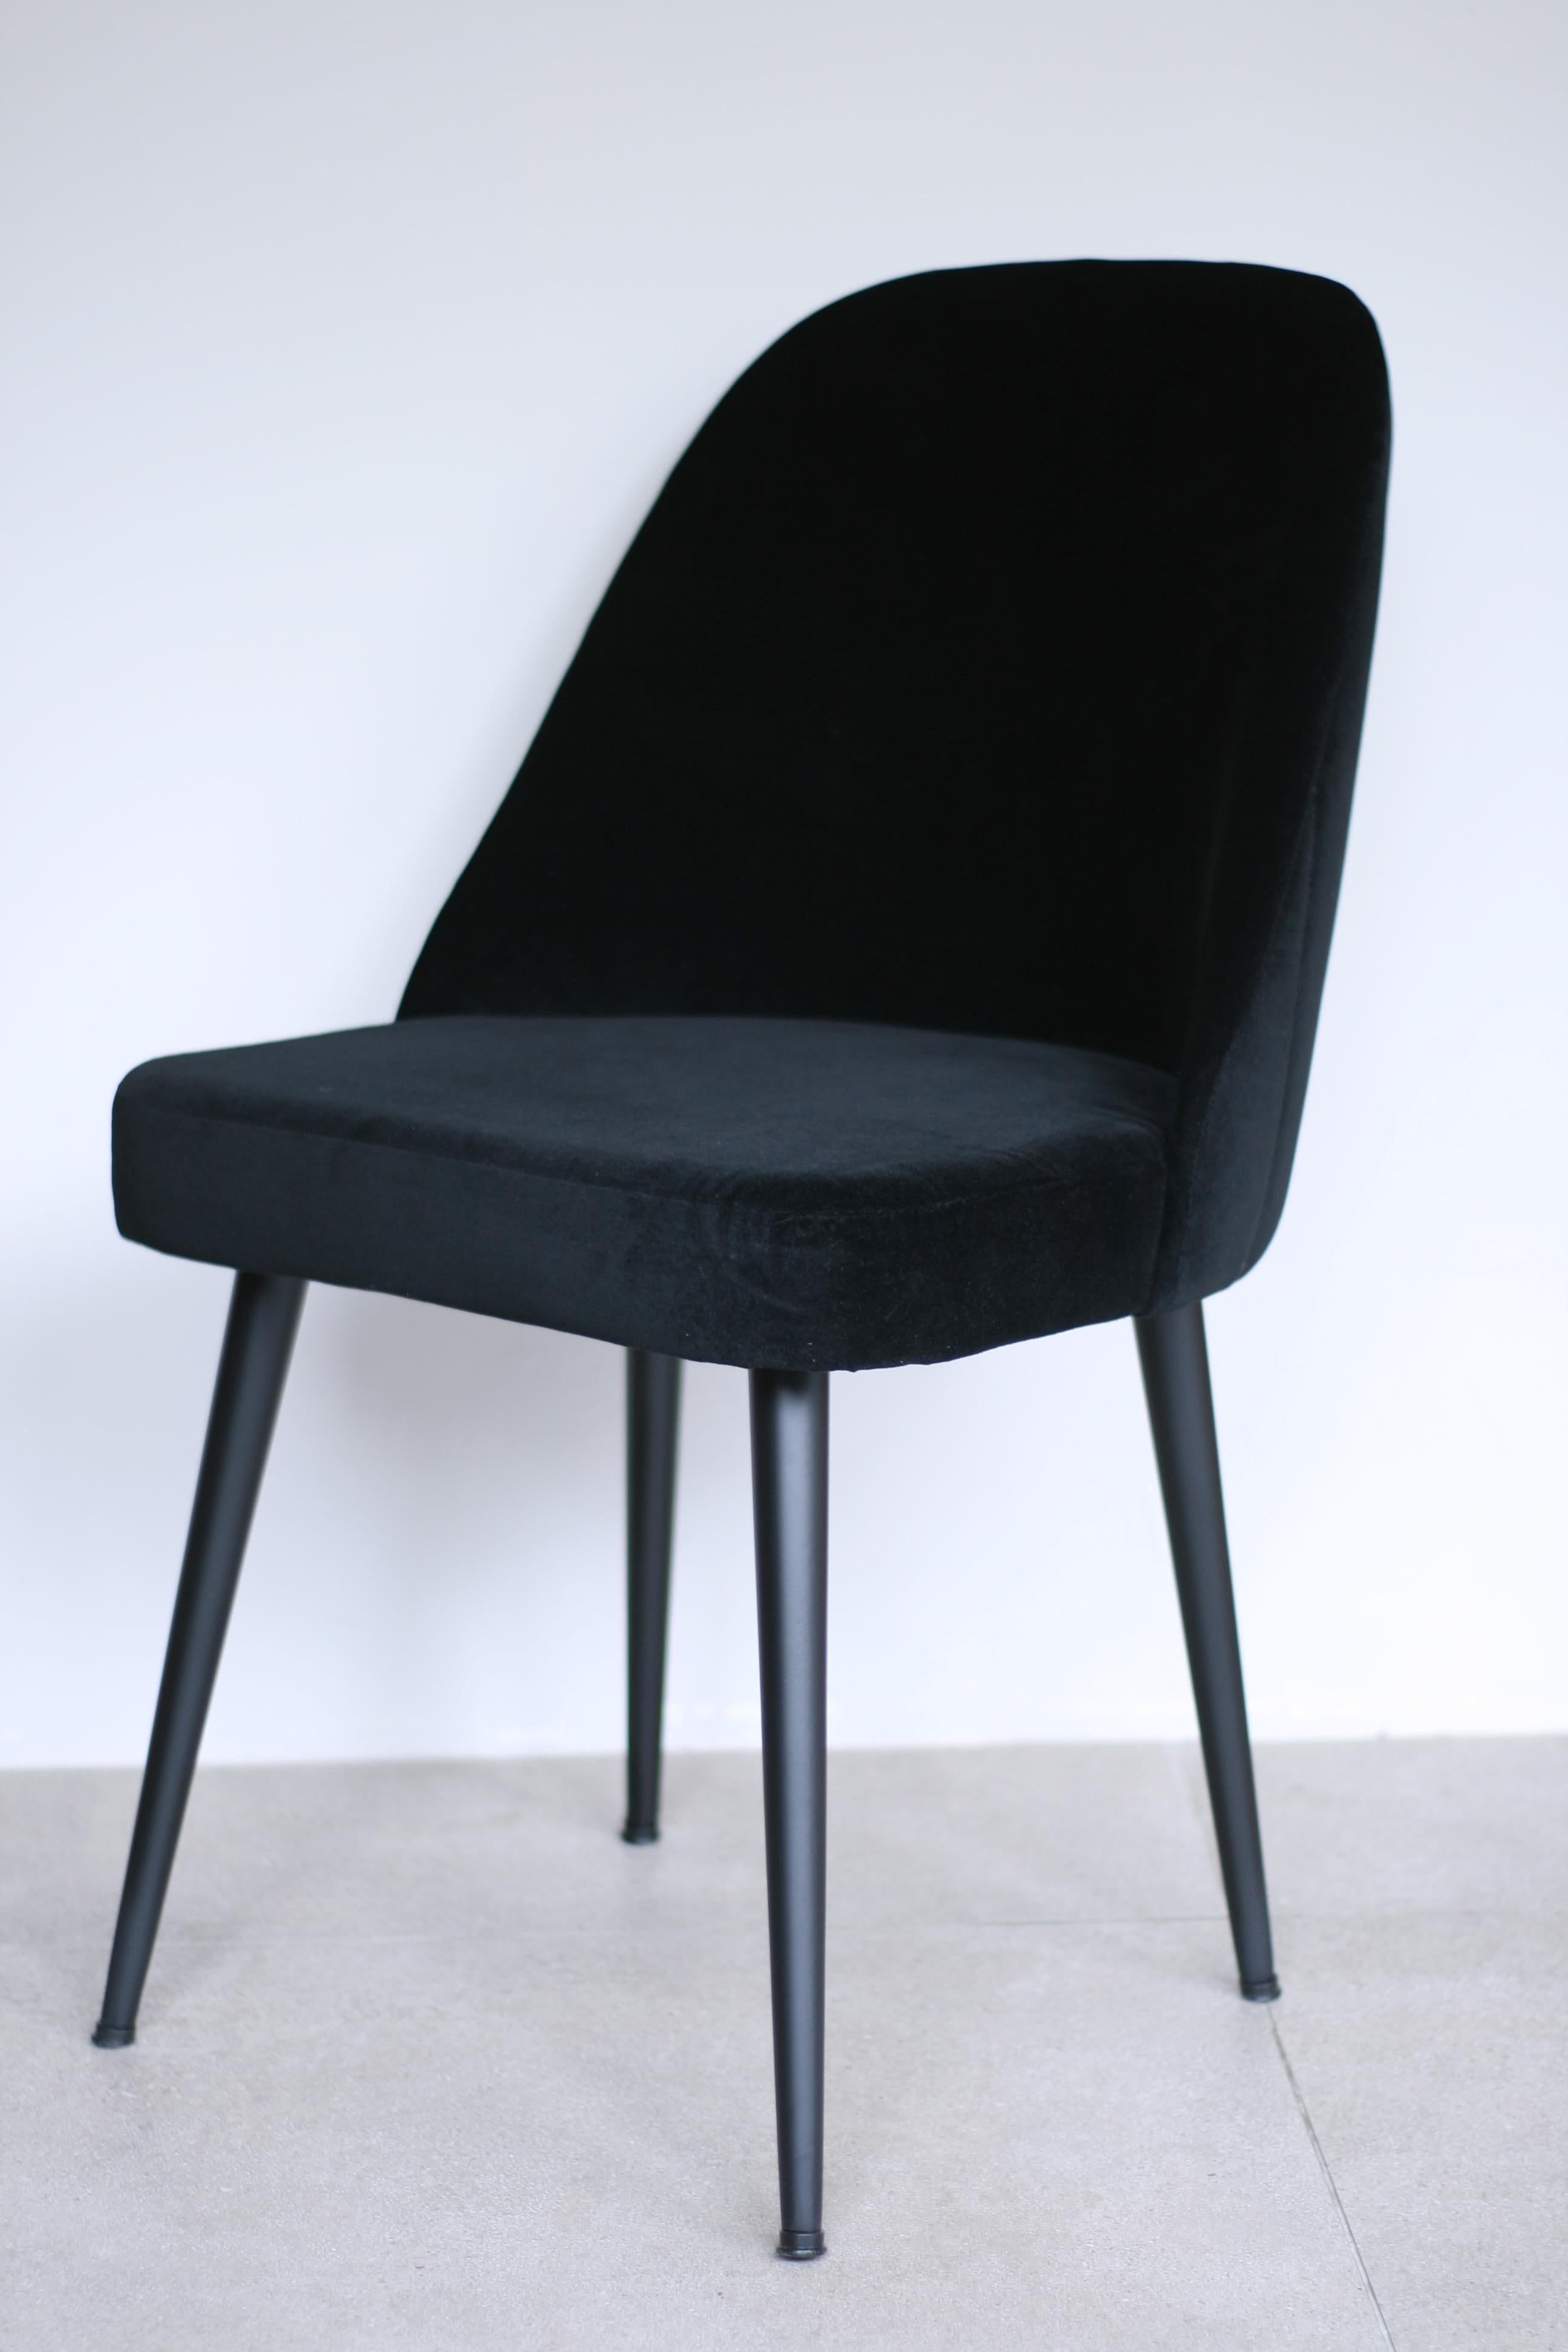 Modern Ebony Black Velvet Fabric Chair with Decorative Back and Steel Black Base For Sale 3